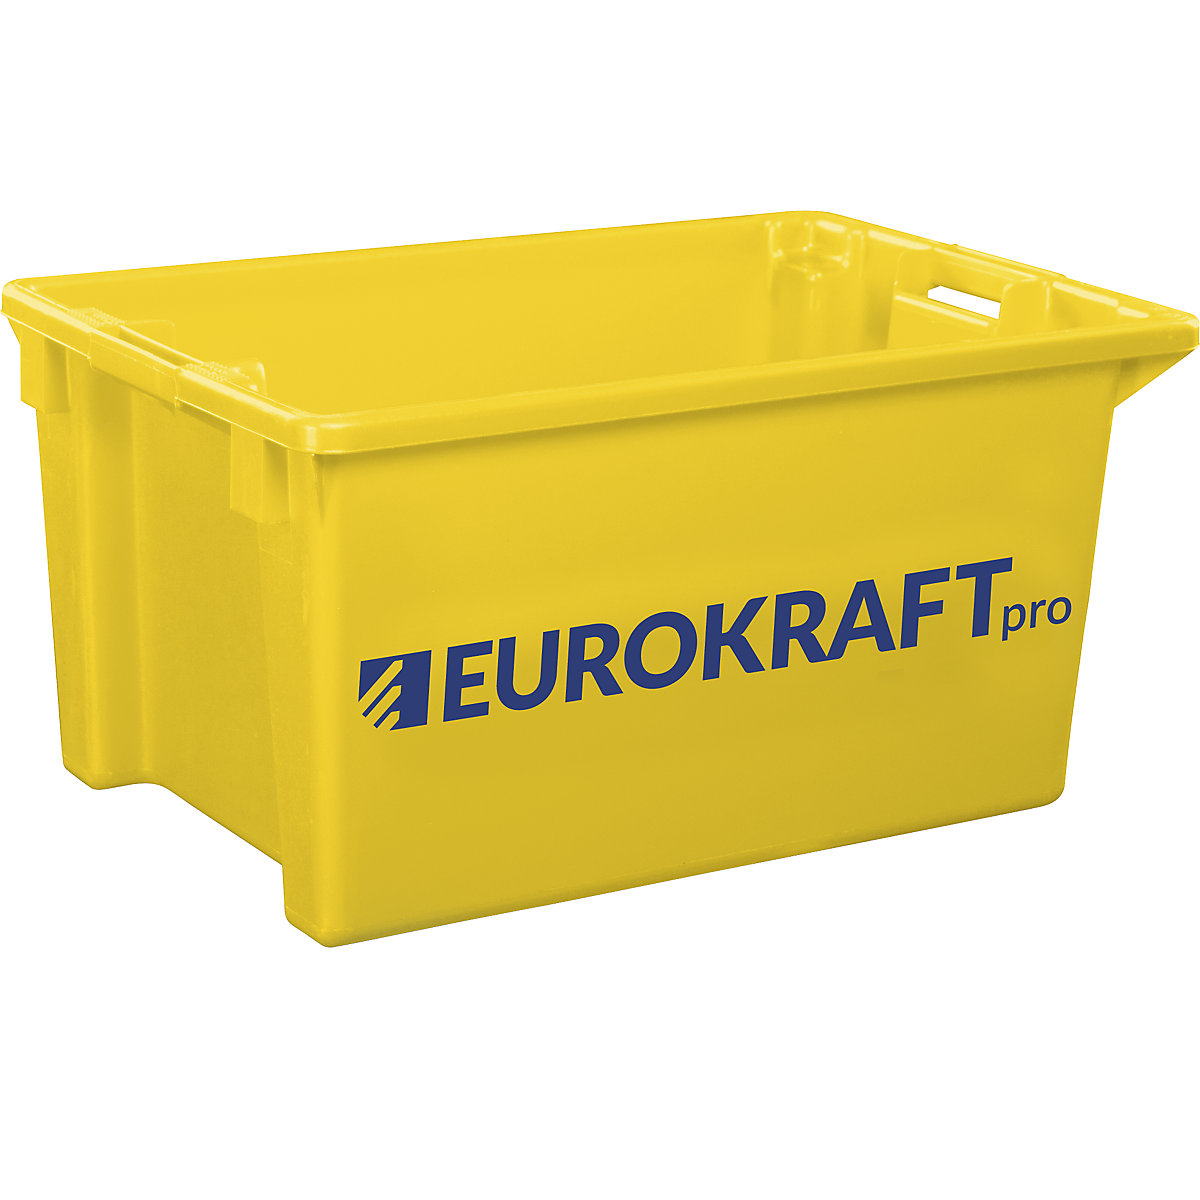 Stack/nest container made of polypropylene suitable for foodstuffs – eurokraft pro, capacity 70 l, pack of 2, solid walls and base, yellow